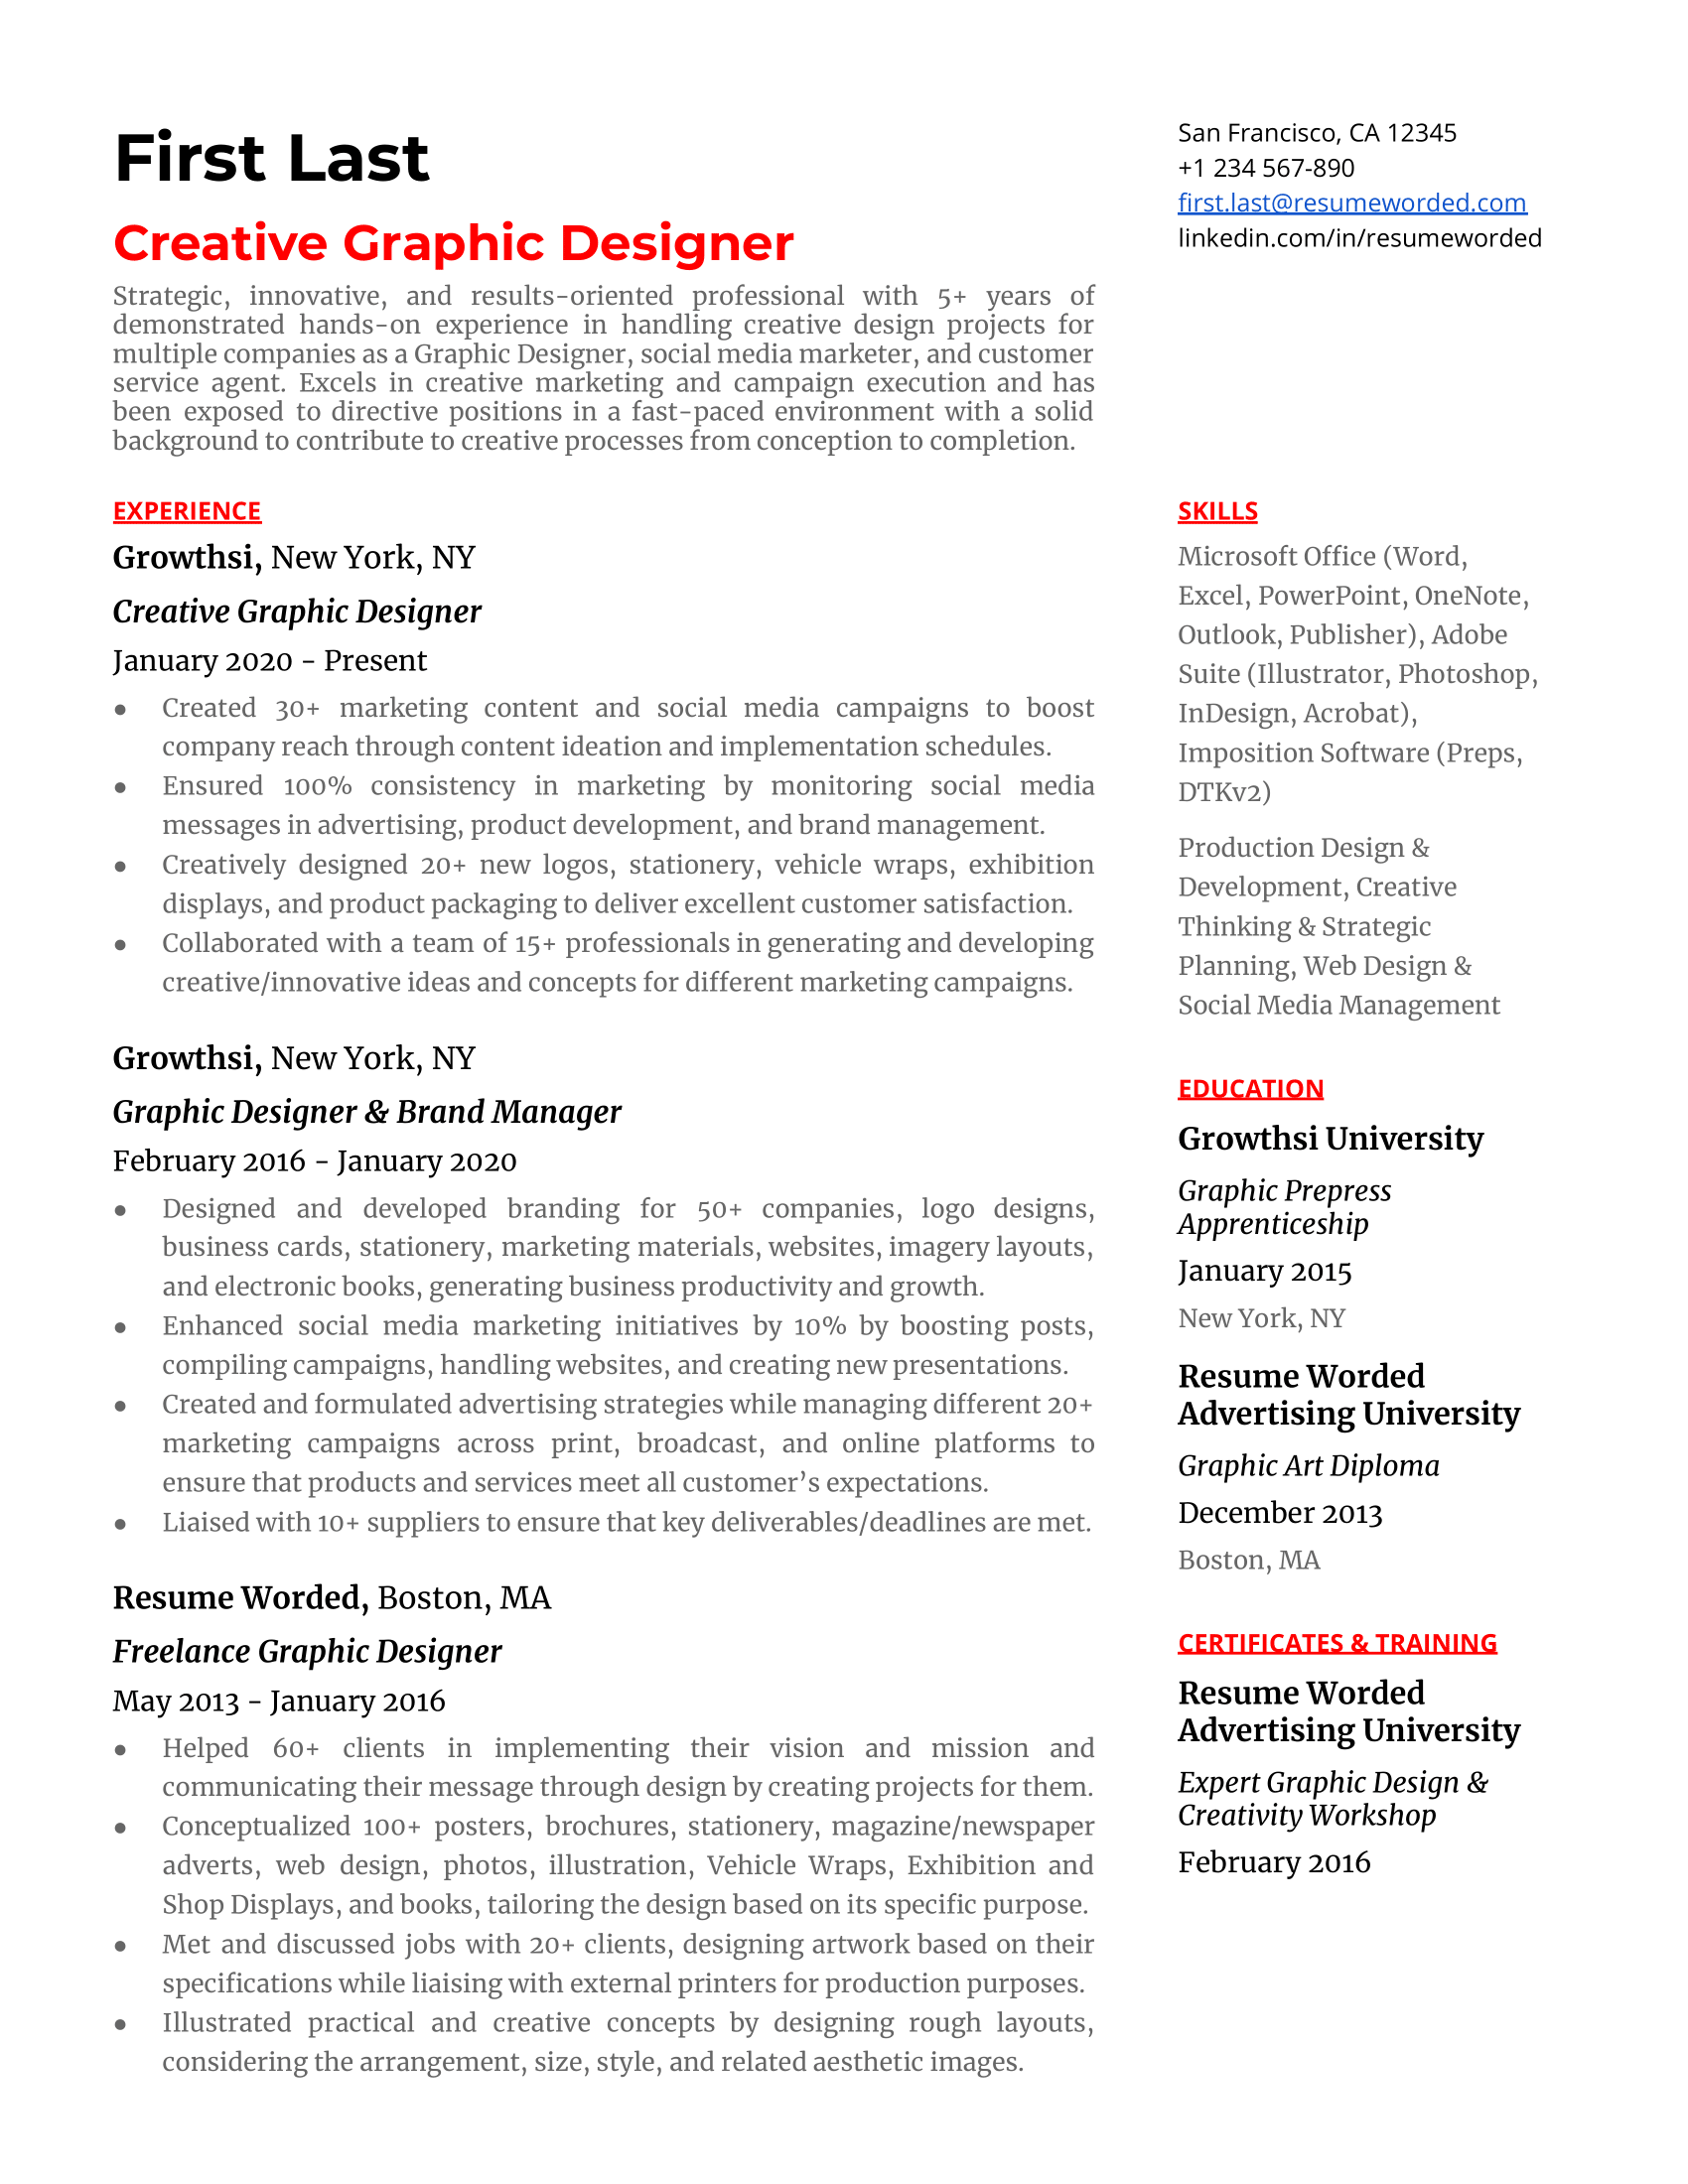 3 Interior Design Resume Examples for 2022  Resume Worded